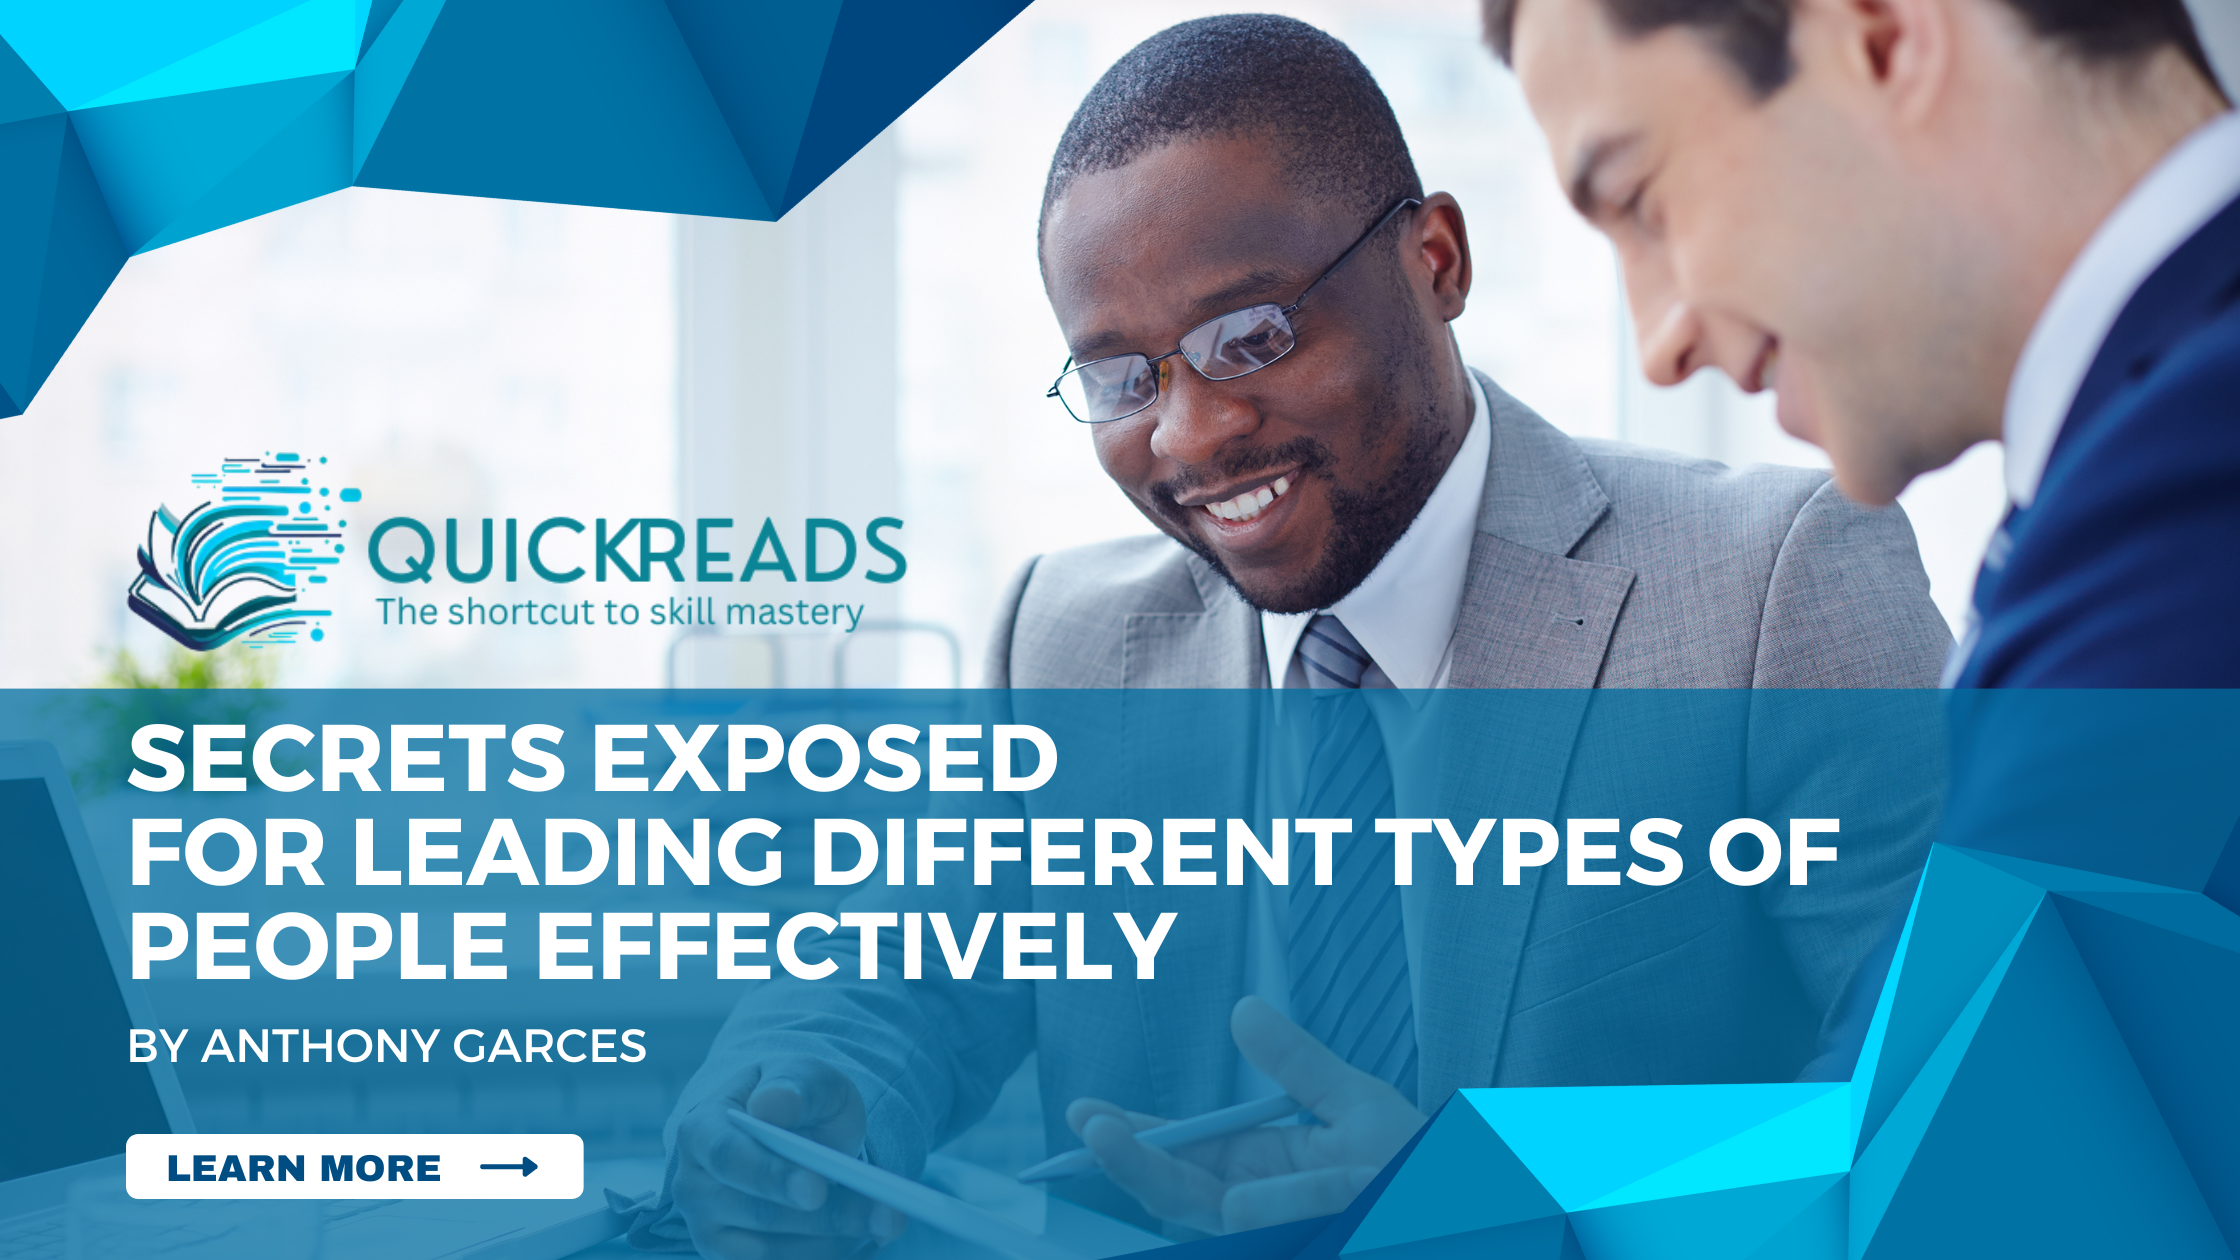 Leading different types of people effectively